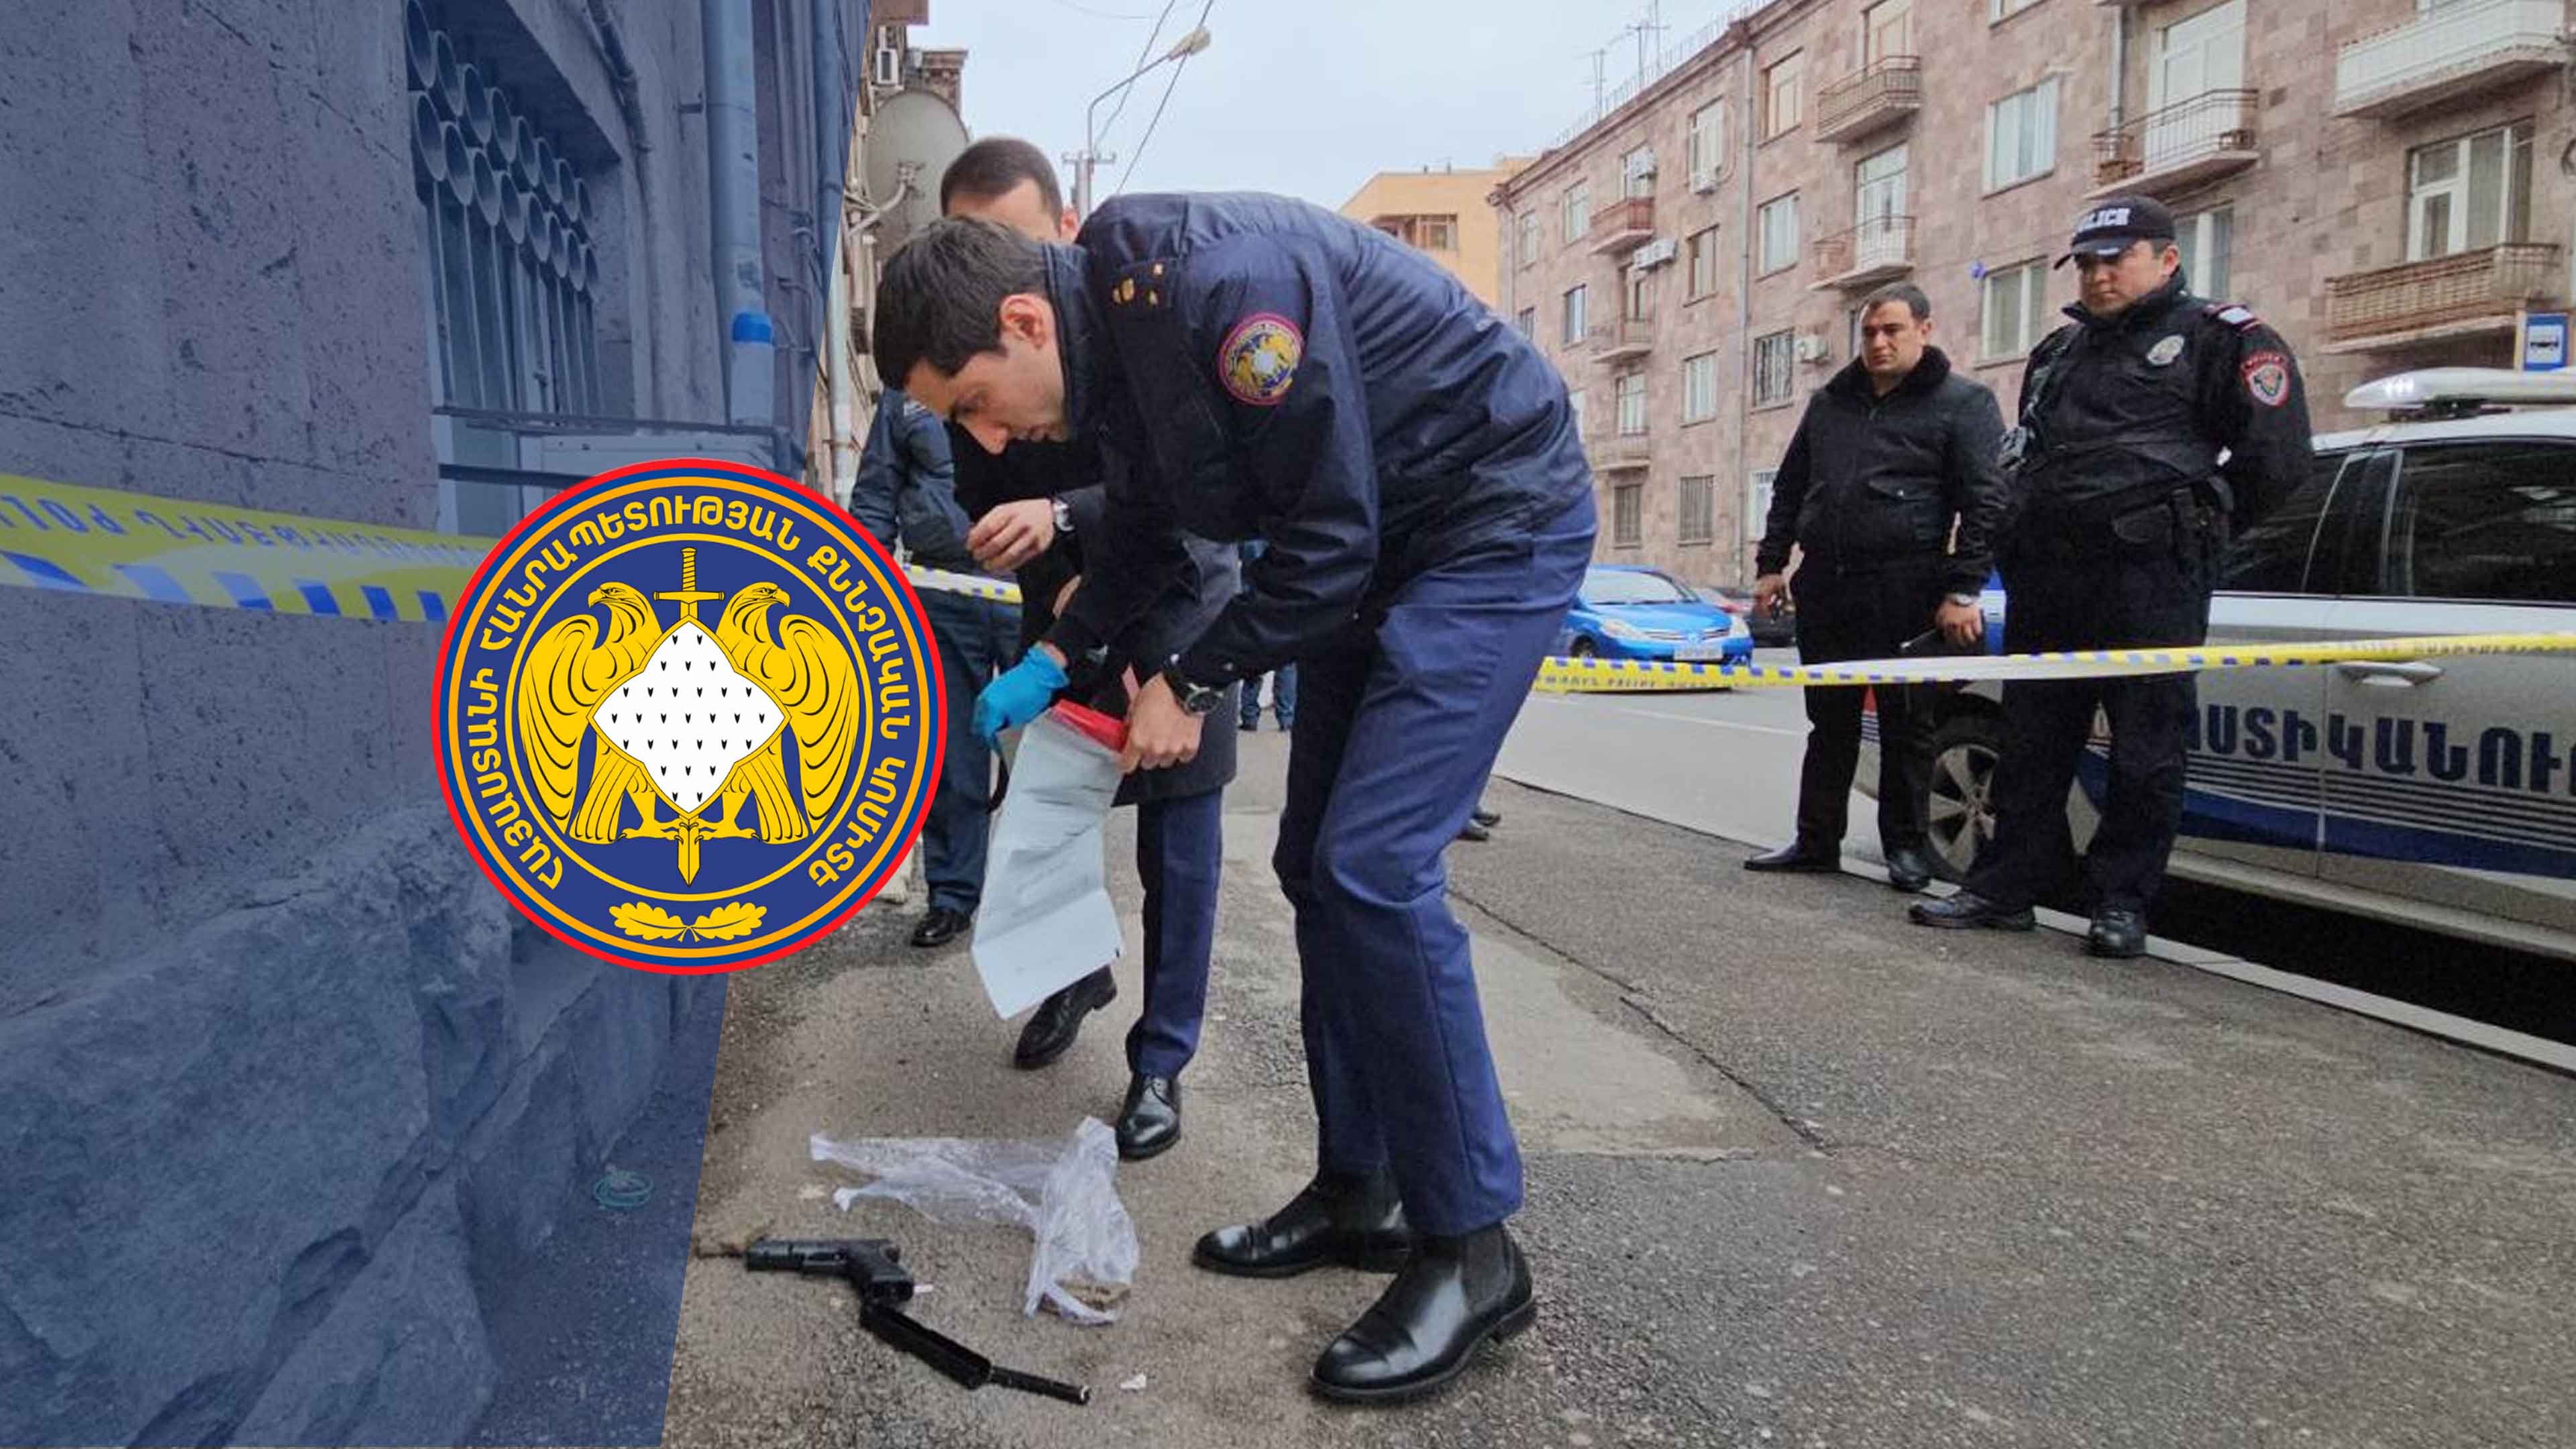 Young Man Charged with Banditry Committed with Pneumatic Gun against Foreigner Found and Detained; 2 Cases of Theft Committed by him Revealed as well